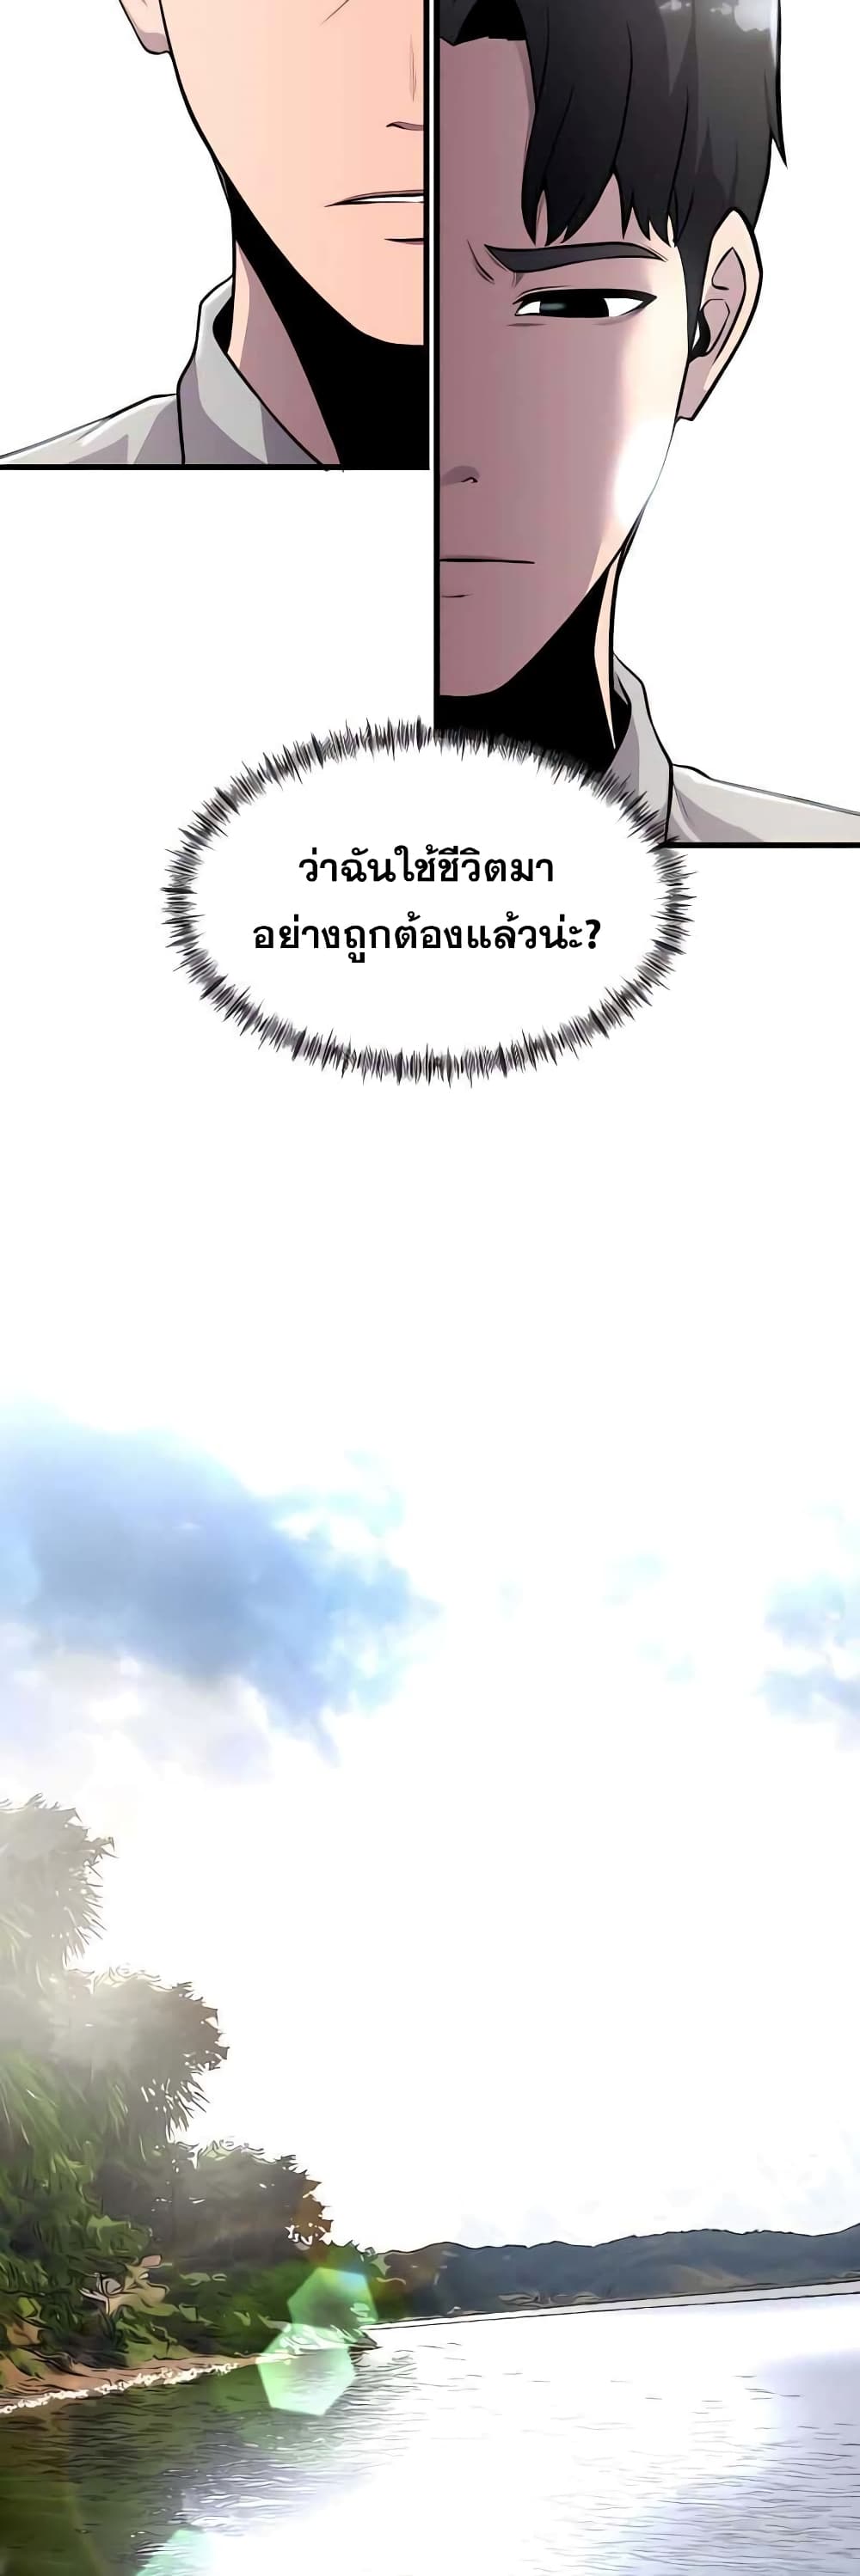 Surviving As a Fish ตอนที่ 3 (23)